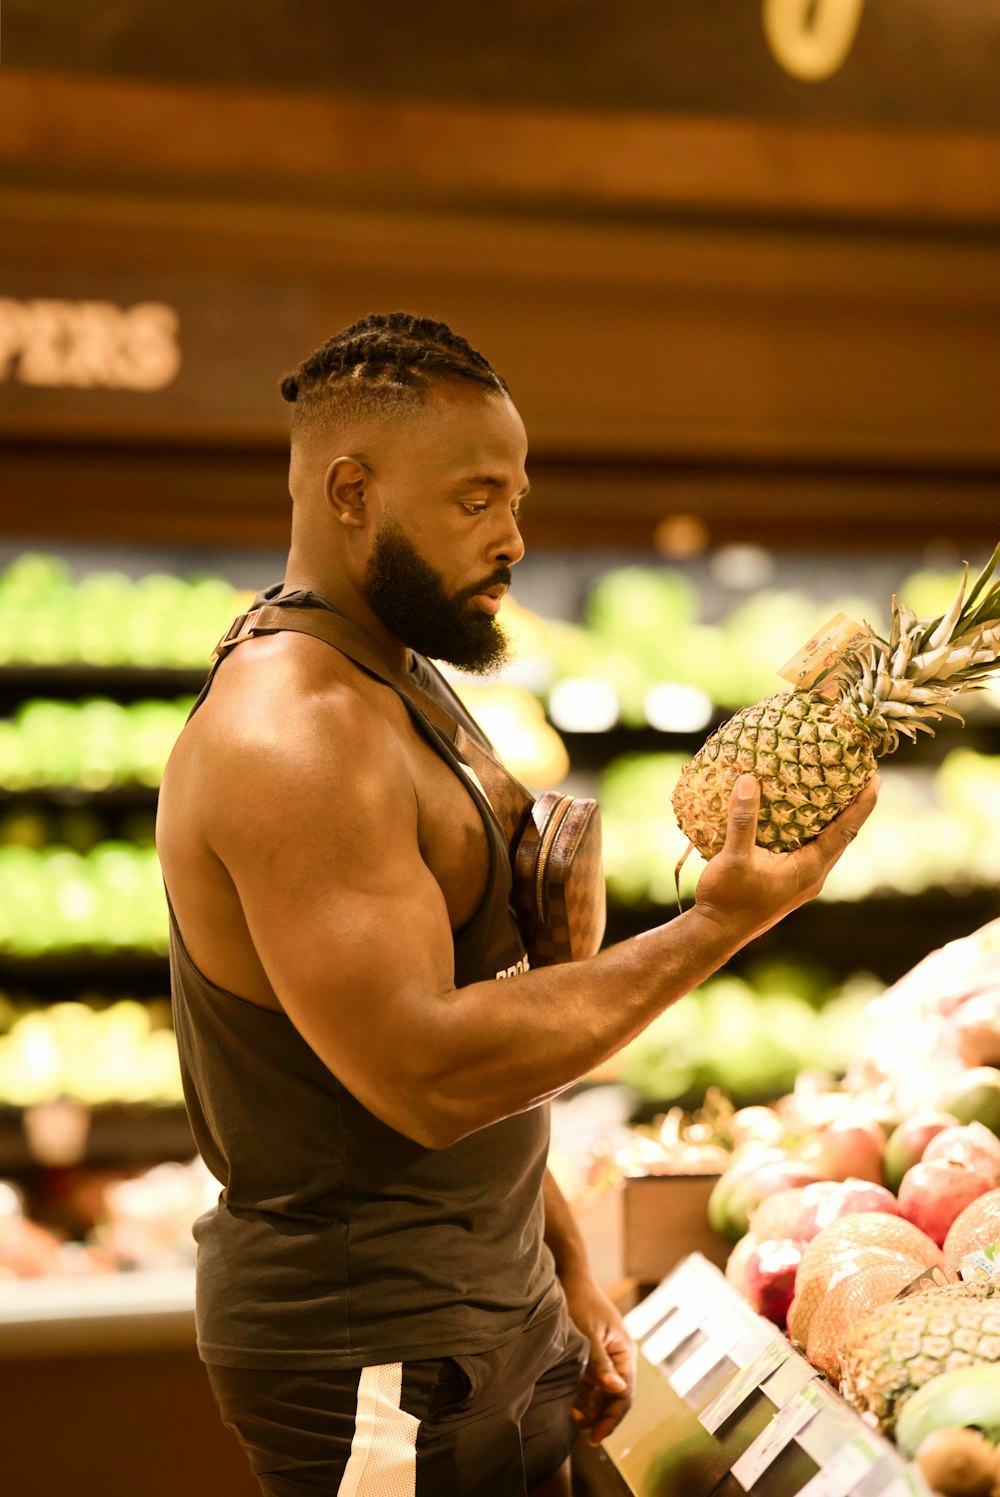 a man holding a pineapple in a grocery store